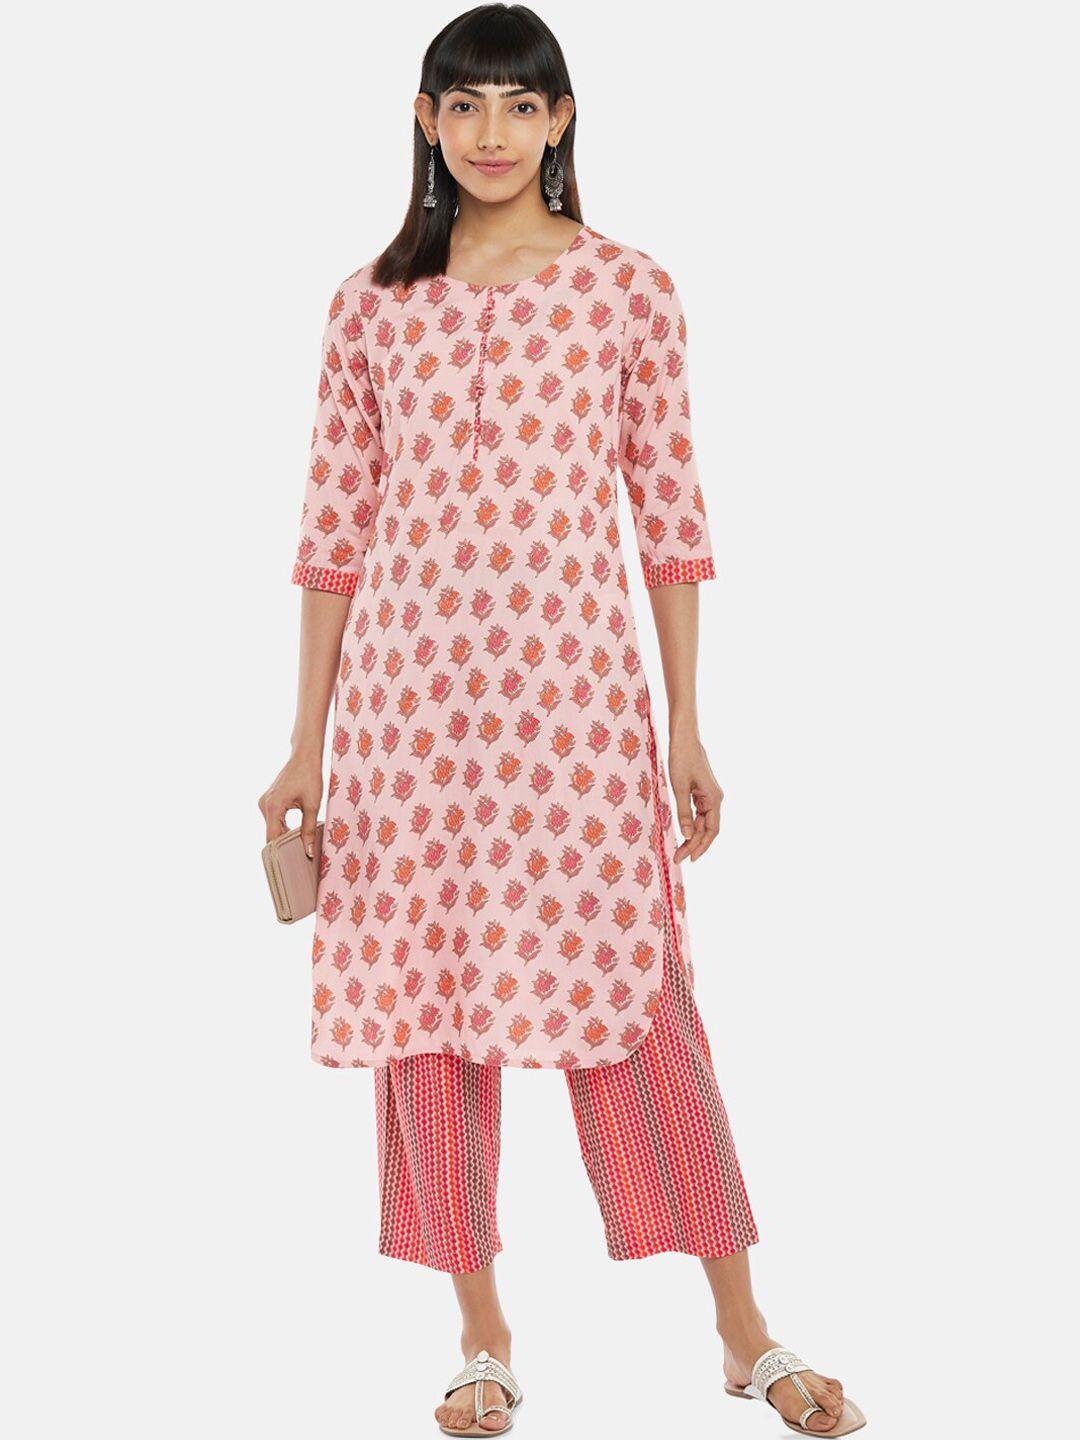 rangmanch by pantaloons women pink floral printed kurti with trousers